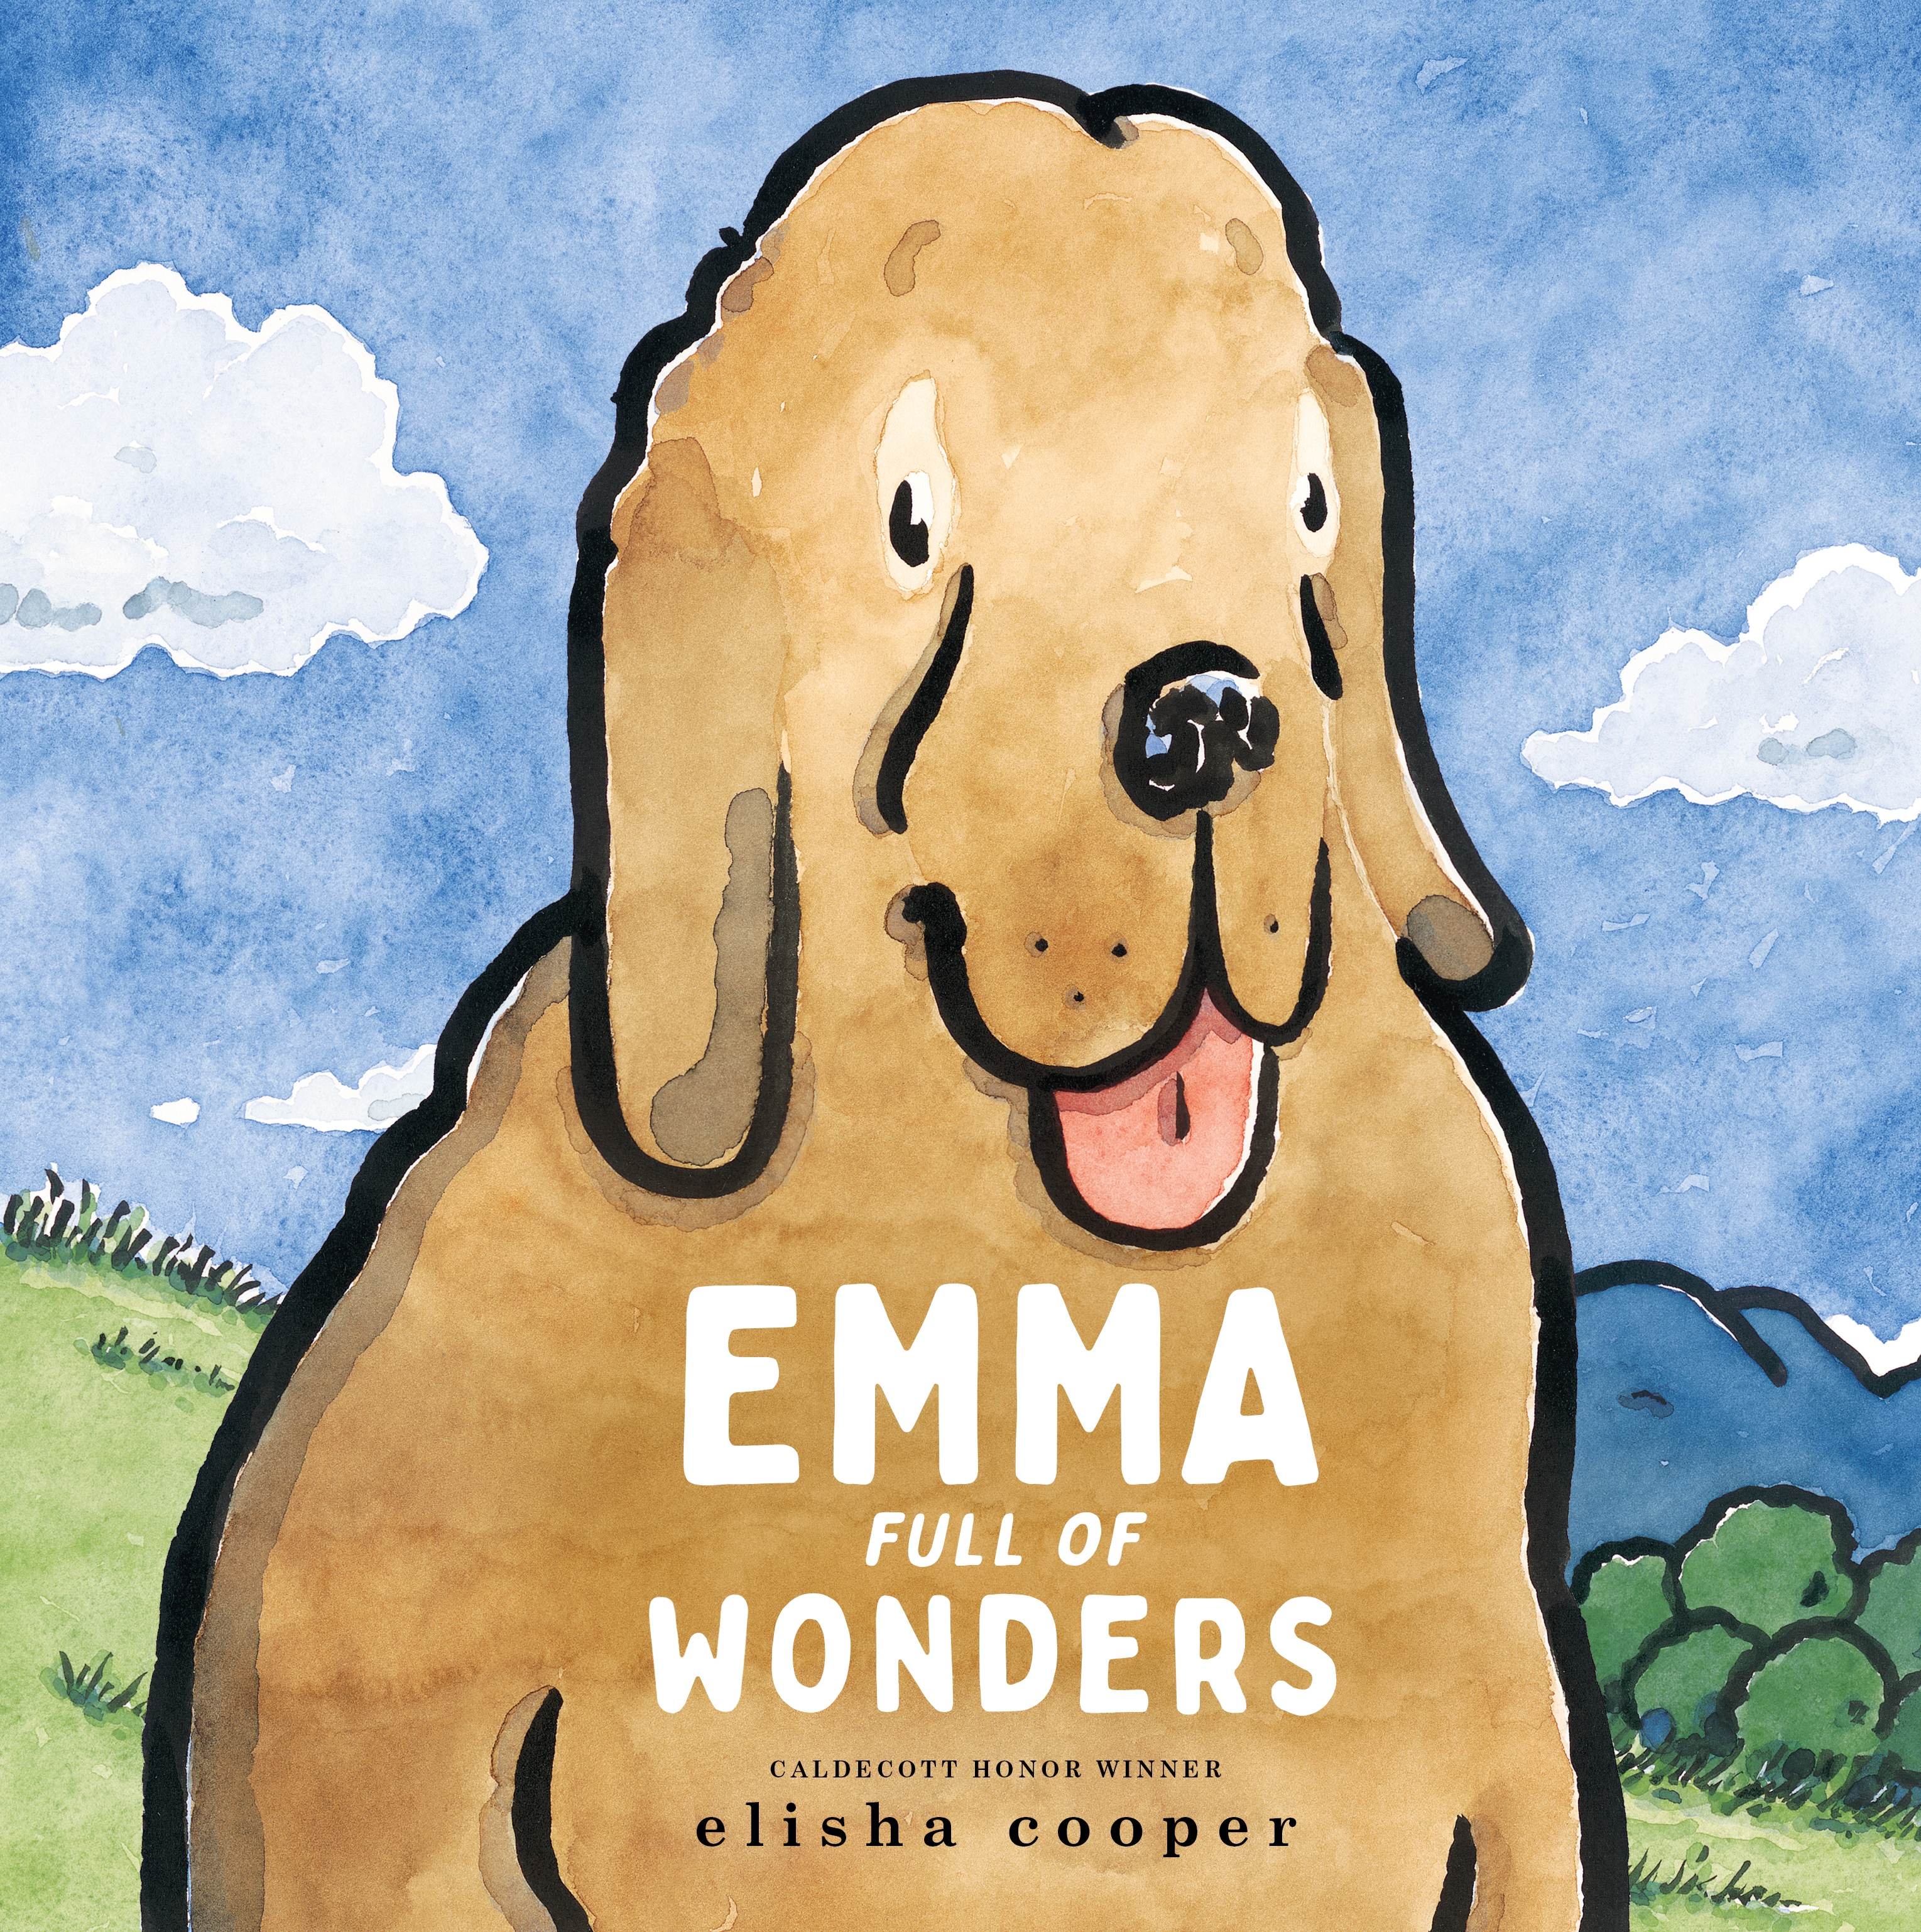 Cover illustration of Emma Full of Wonders, showing a large dog with her tongue hanging out of her mouth, with sky, clouds, grass, and trees in the background.